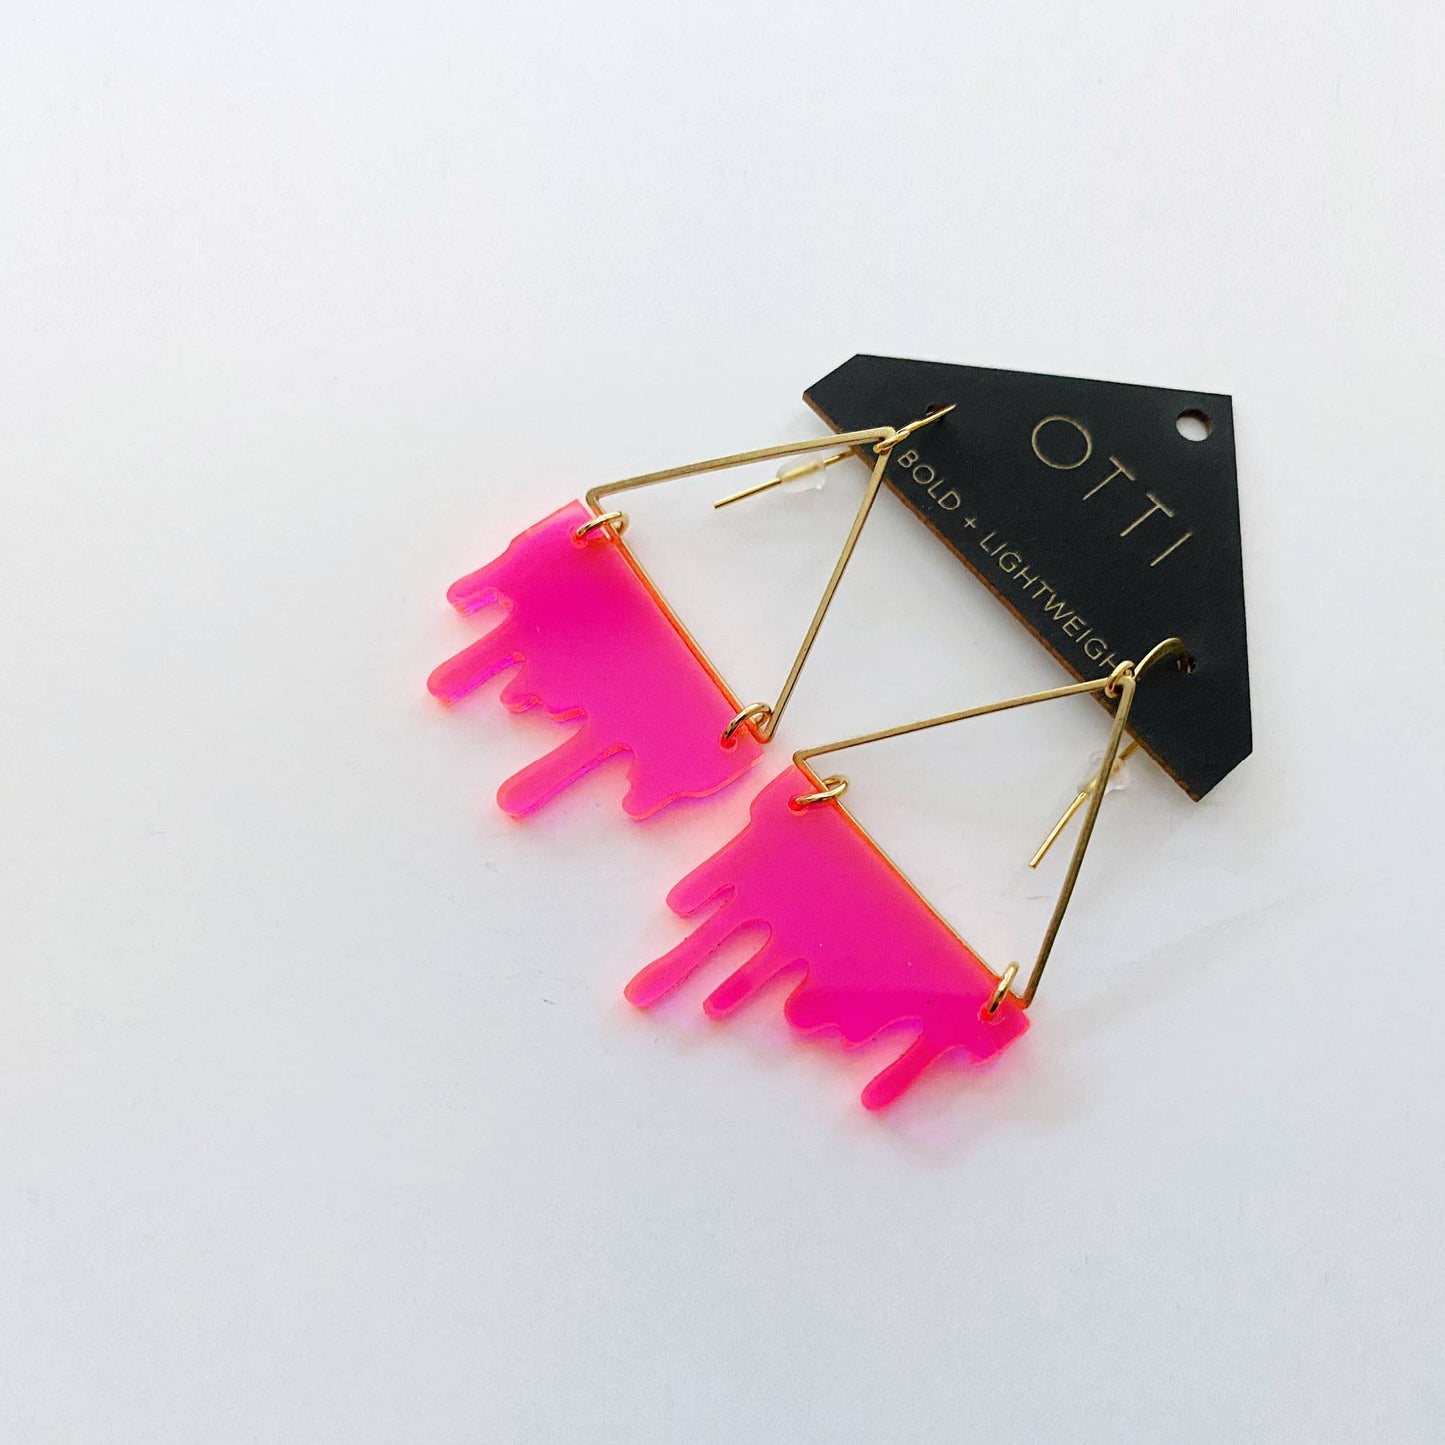 Otti -Dripping "Slime" Acrylic Triangle Earrings: Fluorescent Pink